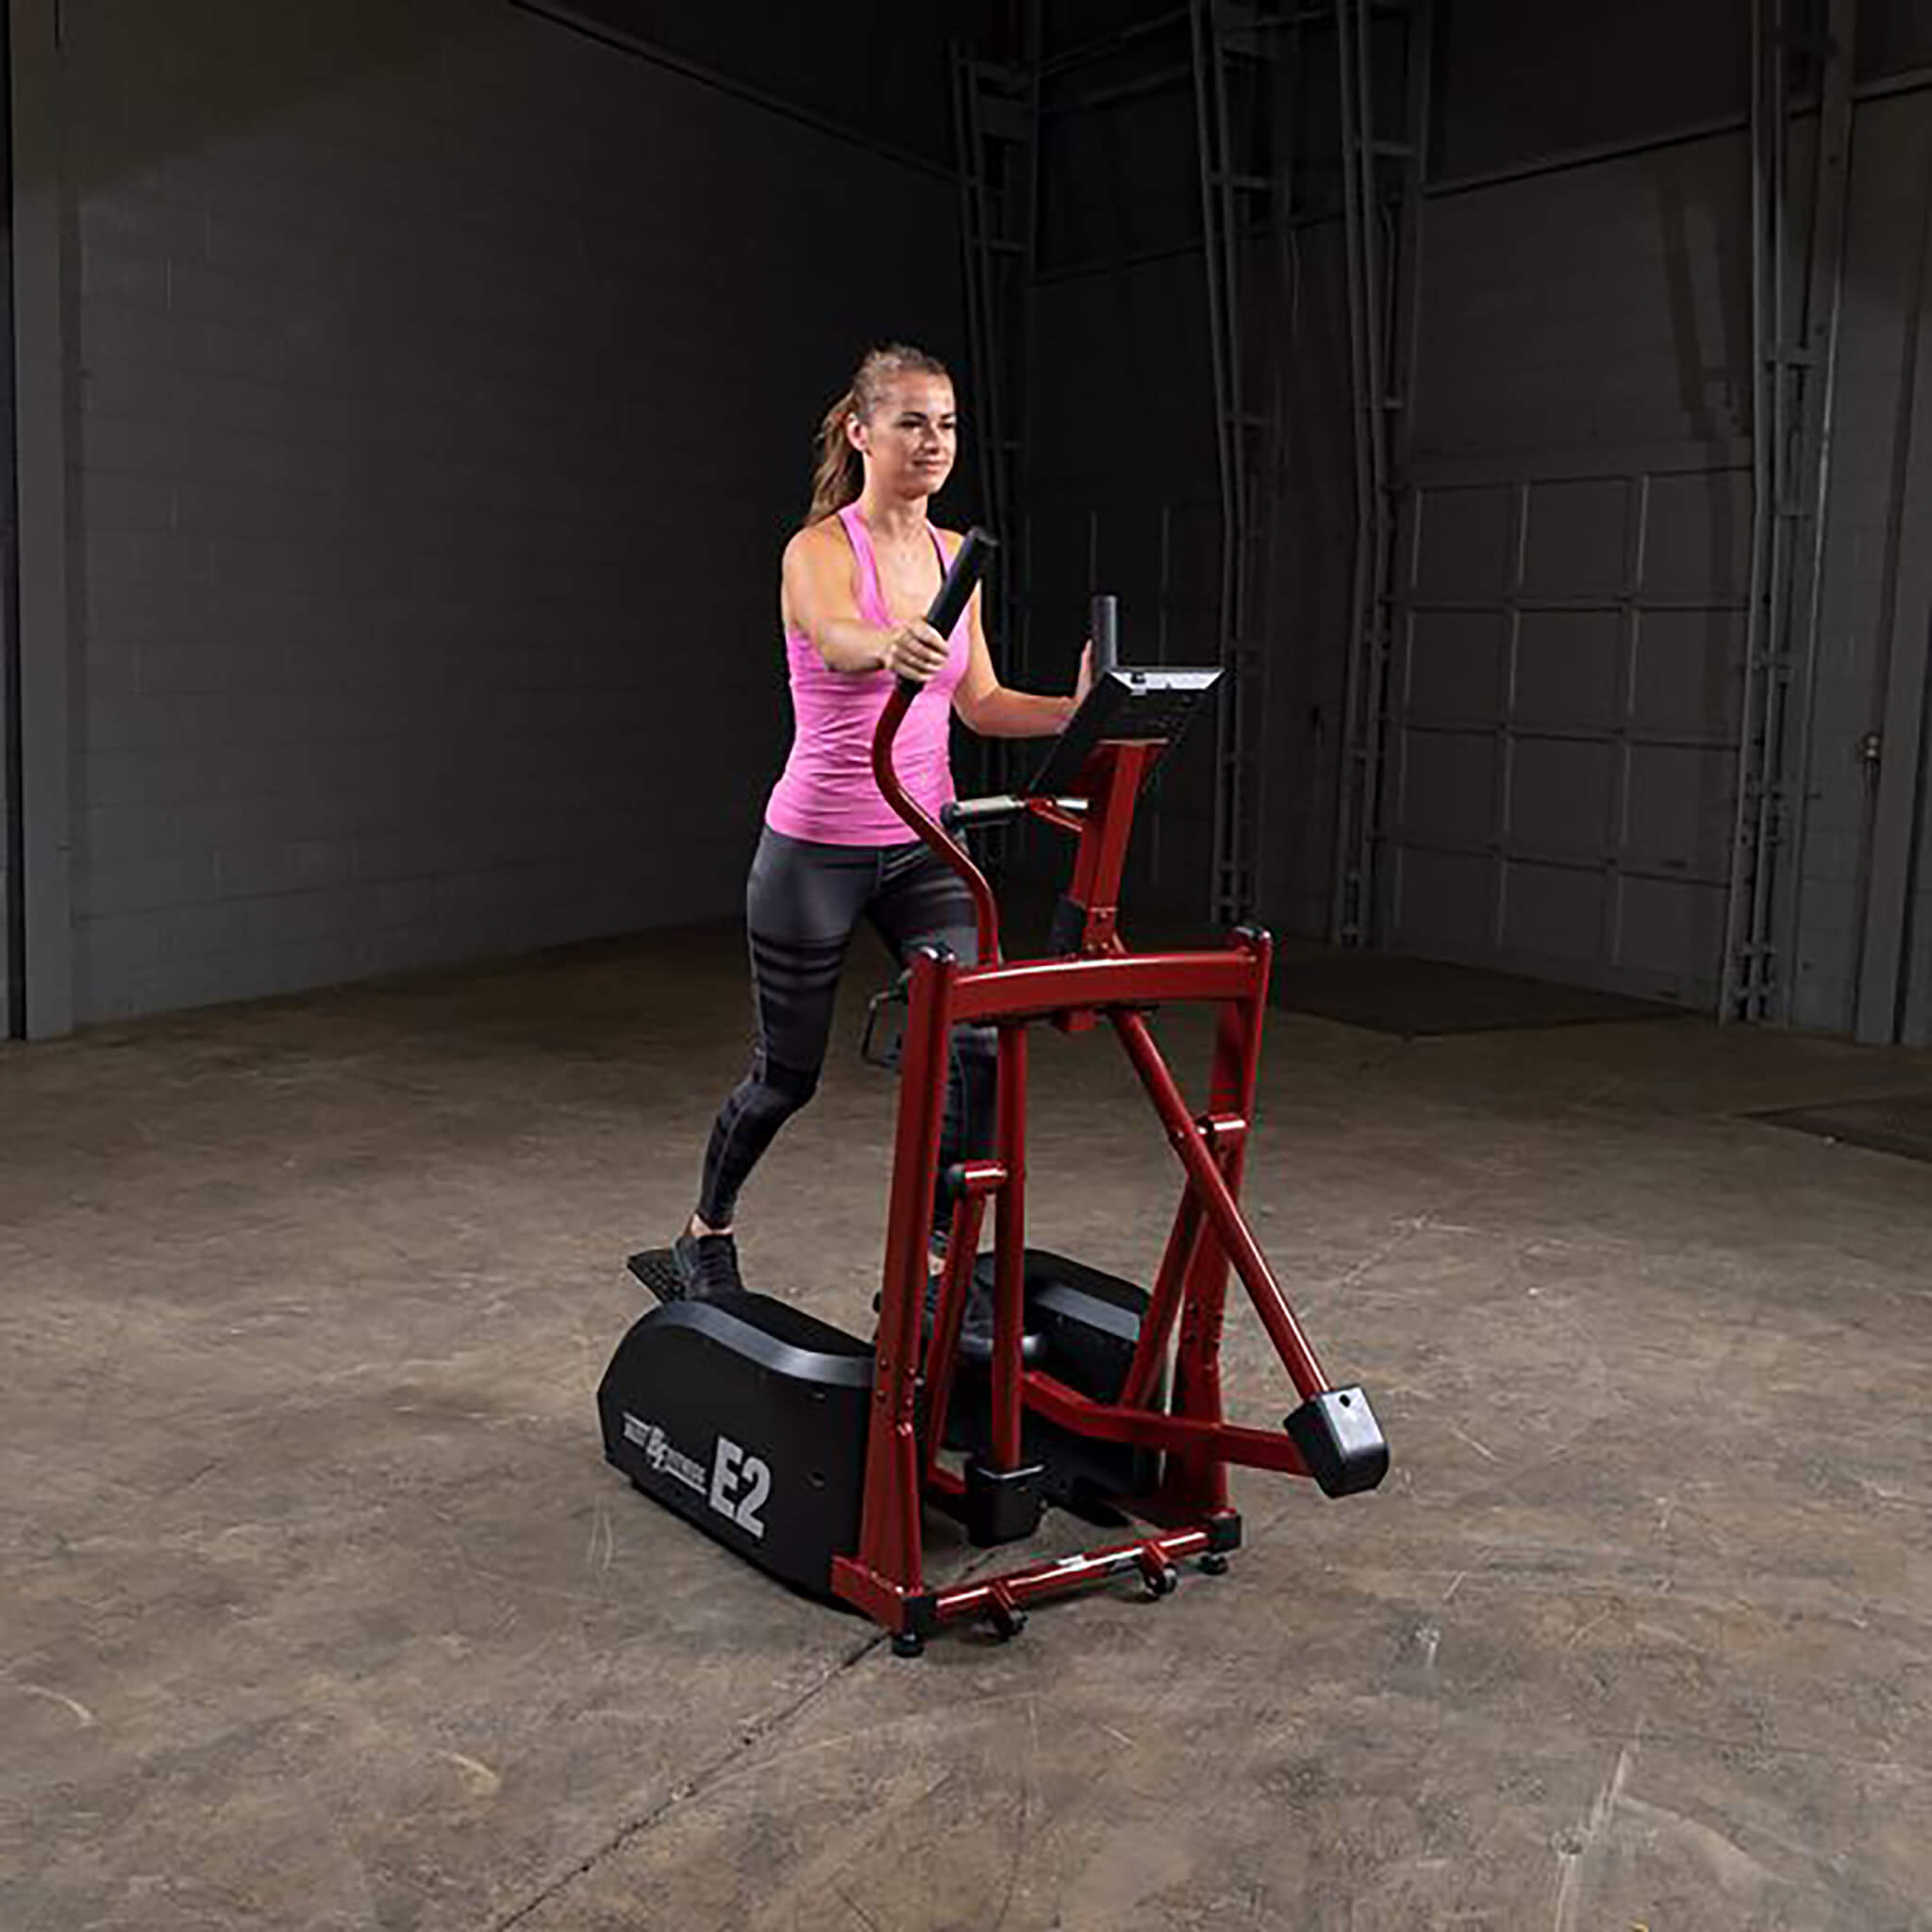 bfe2 best fitness elliptical trainer with model corner view